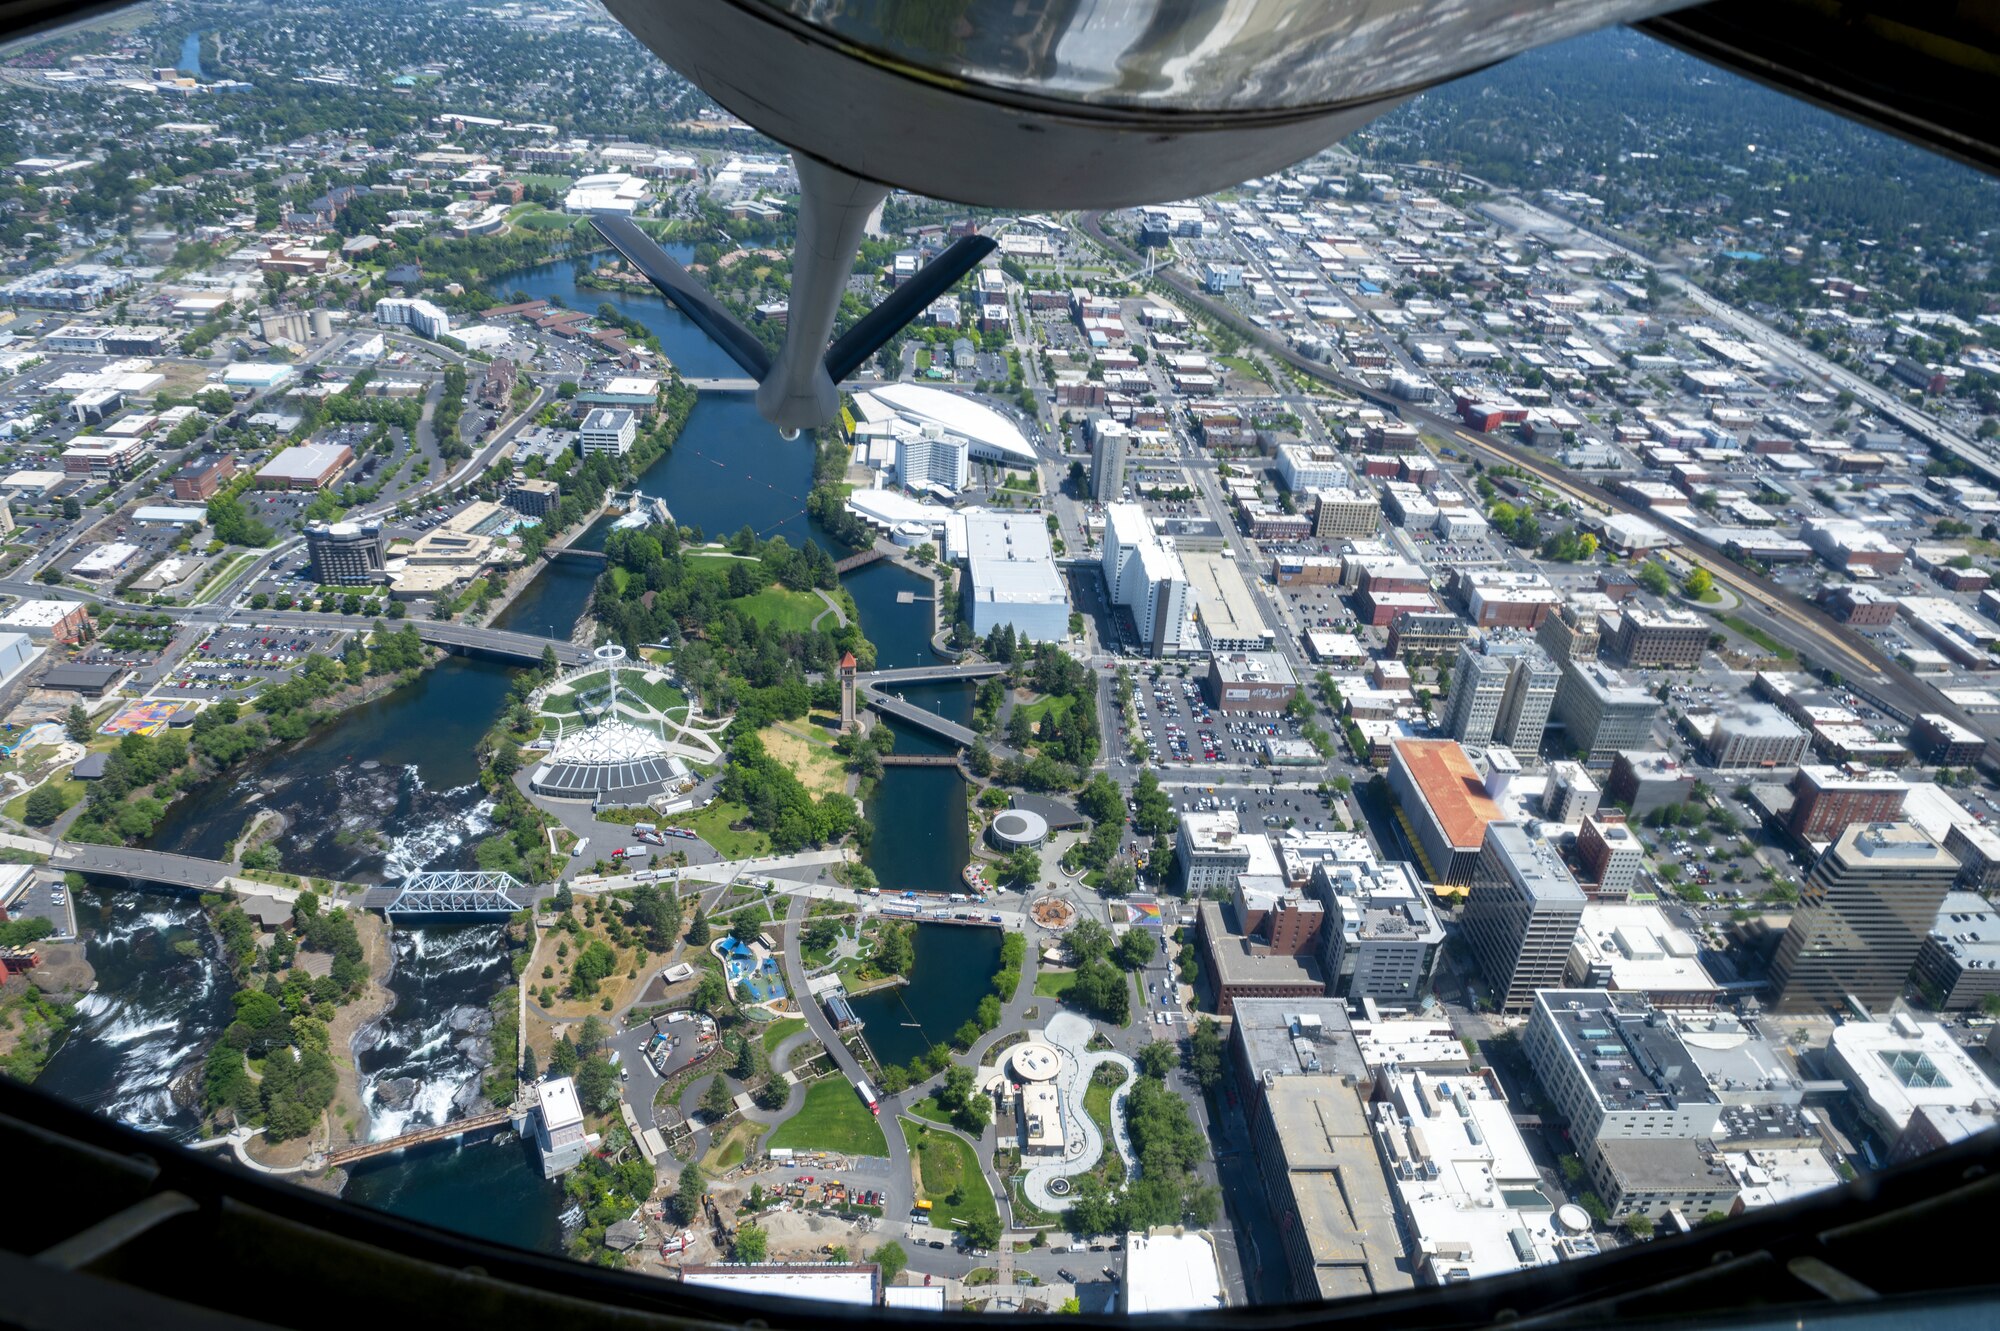 A KC-135 Stratotanker assigned to Fairchild Air Force Base, Washington, flies over downtown Spokane as part of Operation Centennial Contact June 27, 2023. The movement, which also included flights over Yellowstone National Park, Mount Rushmore and Glacier National Park, was part of Air Mobility Command’s celebration of 100 years air refueling operations and demonstrated the 92nd Air Refueling Wing’s global reach capabilities. Since its inception in 1923, air refueling has become a crucial component of military and civilian aviation operations around the world by extending the range and endurance of aircraft and enabling them to complete missions that would otherwise be impossible or require multiple stops. As a result, this capability is essential for strategic and tactical operations, as well as humanitarian relief efforts in support of AMC, U.S. Transportation Command and Department of Defense priorities. (U.S. Air Force photo by Staff Sgt. Lawrence Sena)